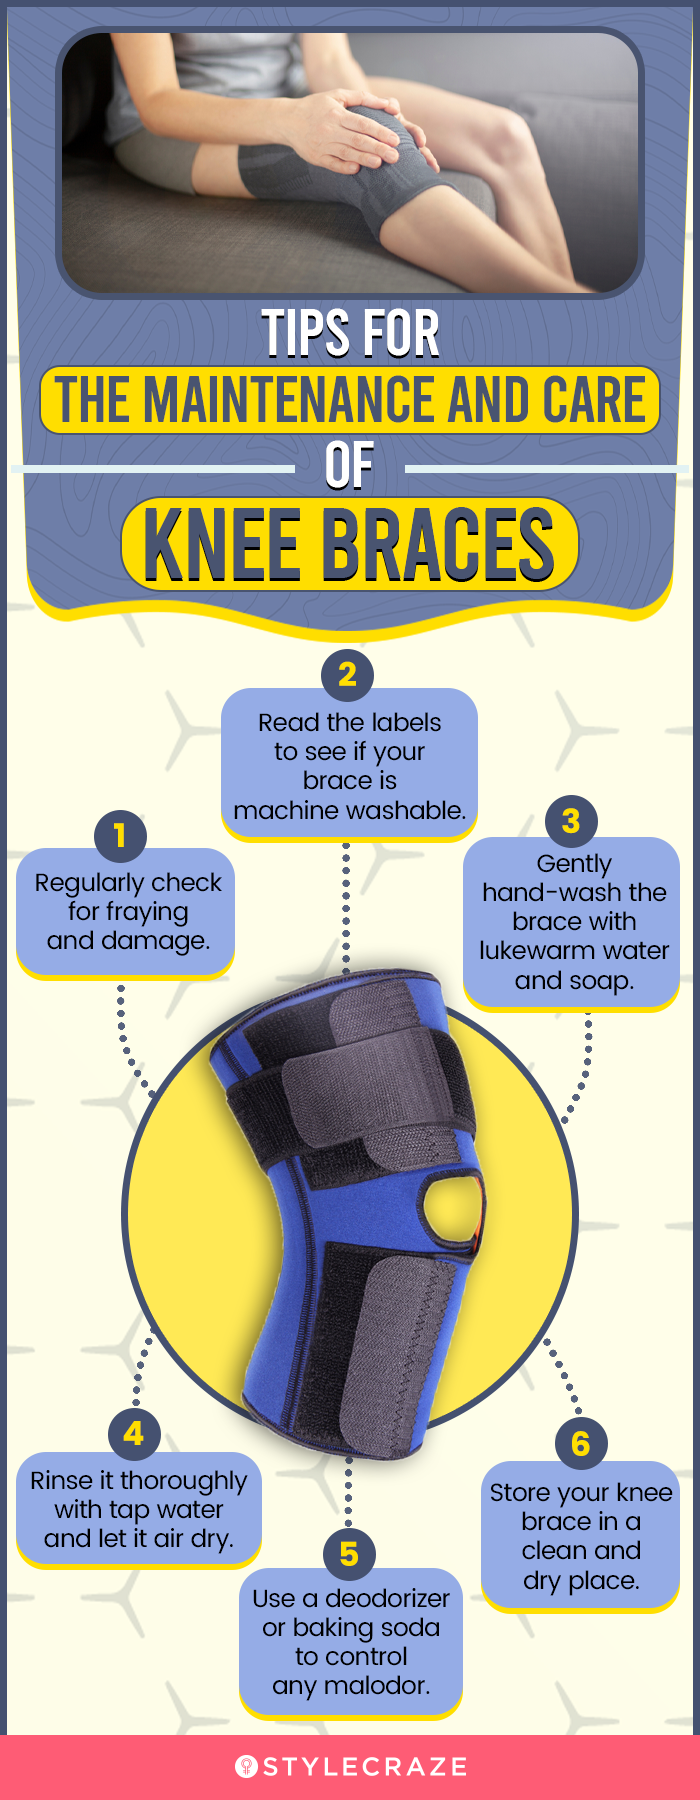 Tips For Maintenance And Care For Your Knee Braces (infographic)